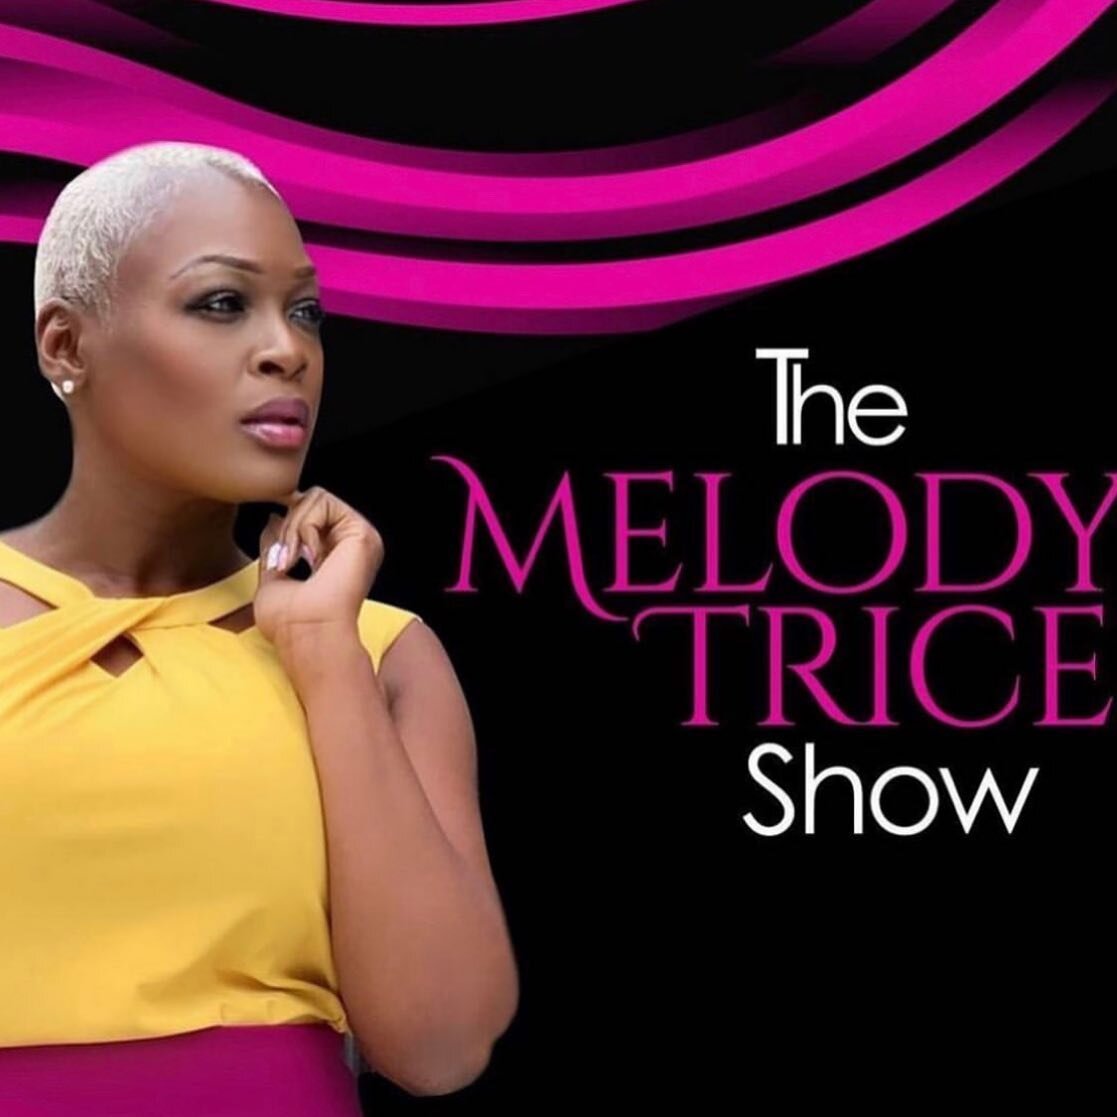 Melody Trice